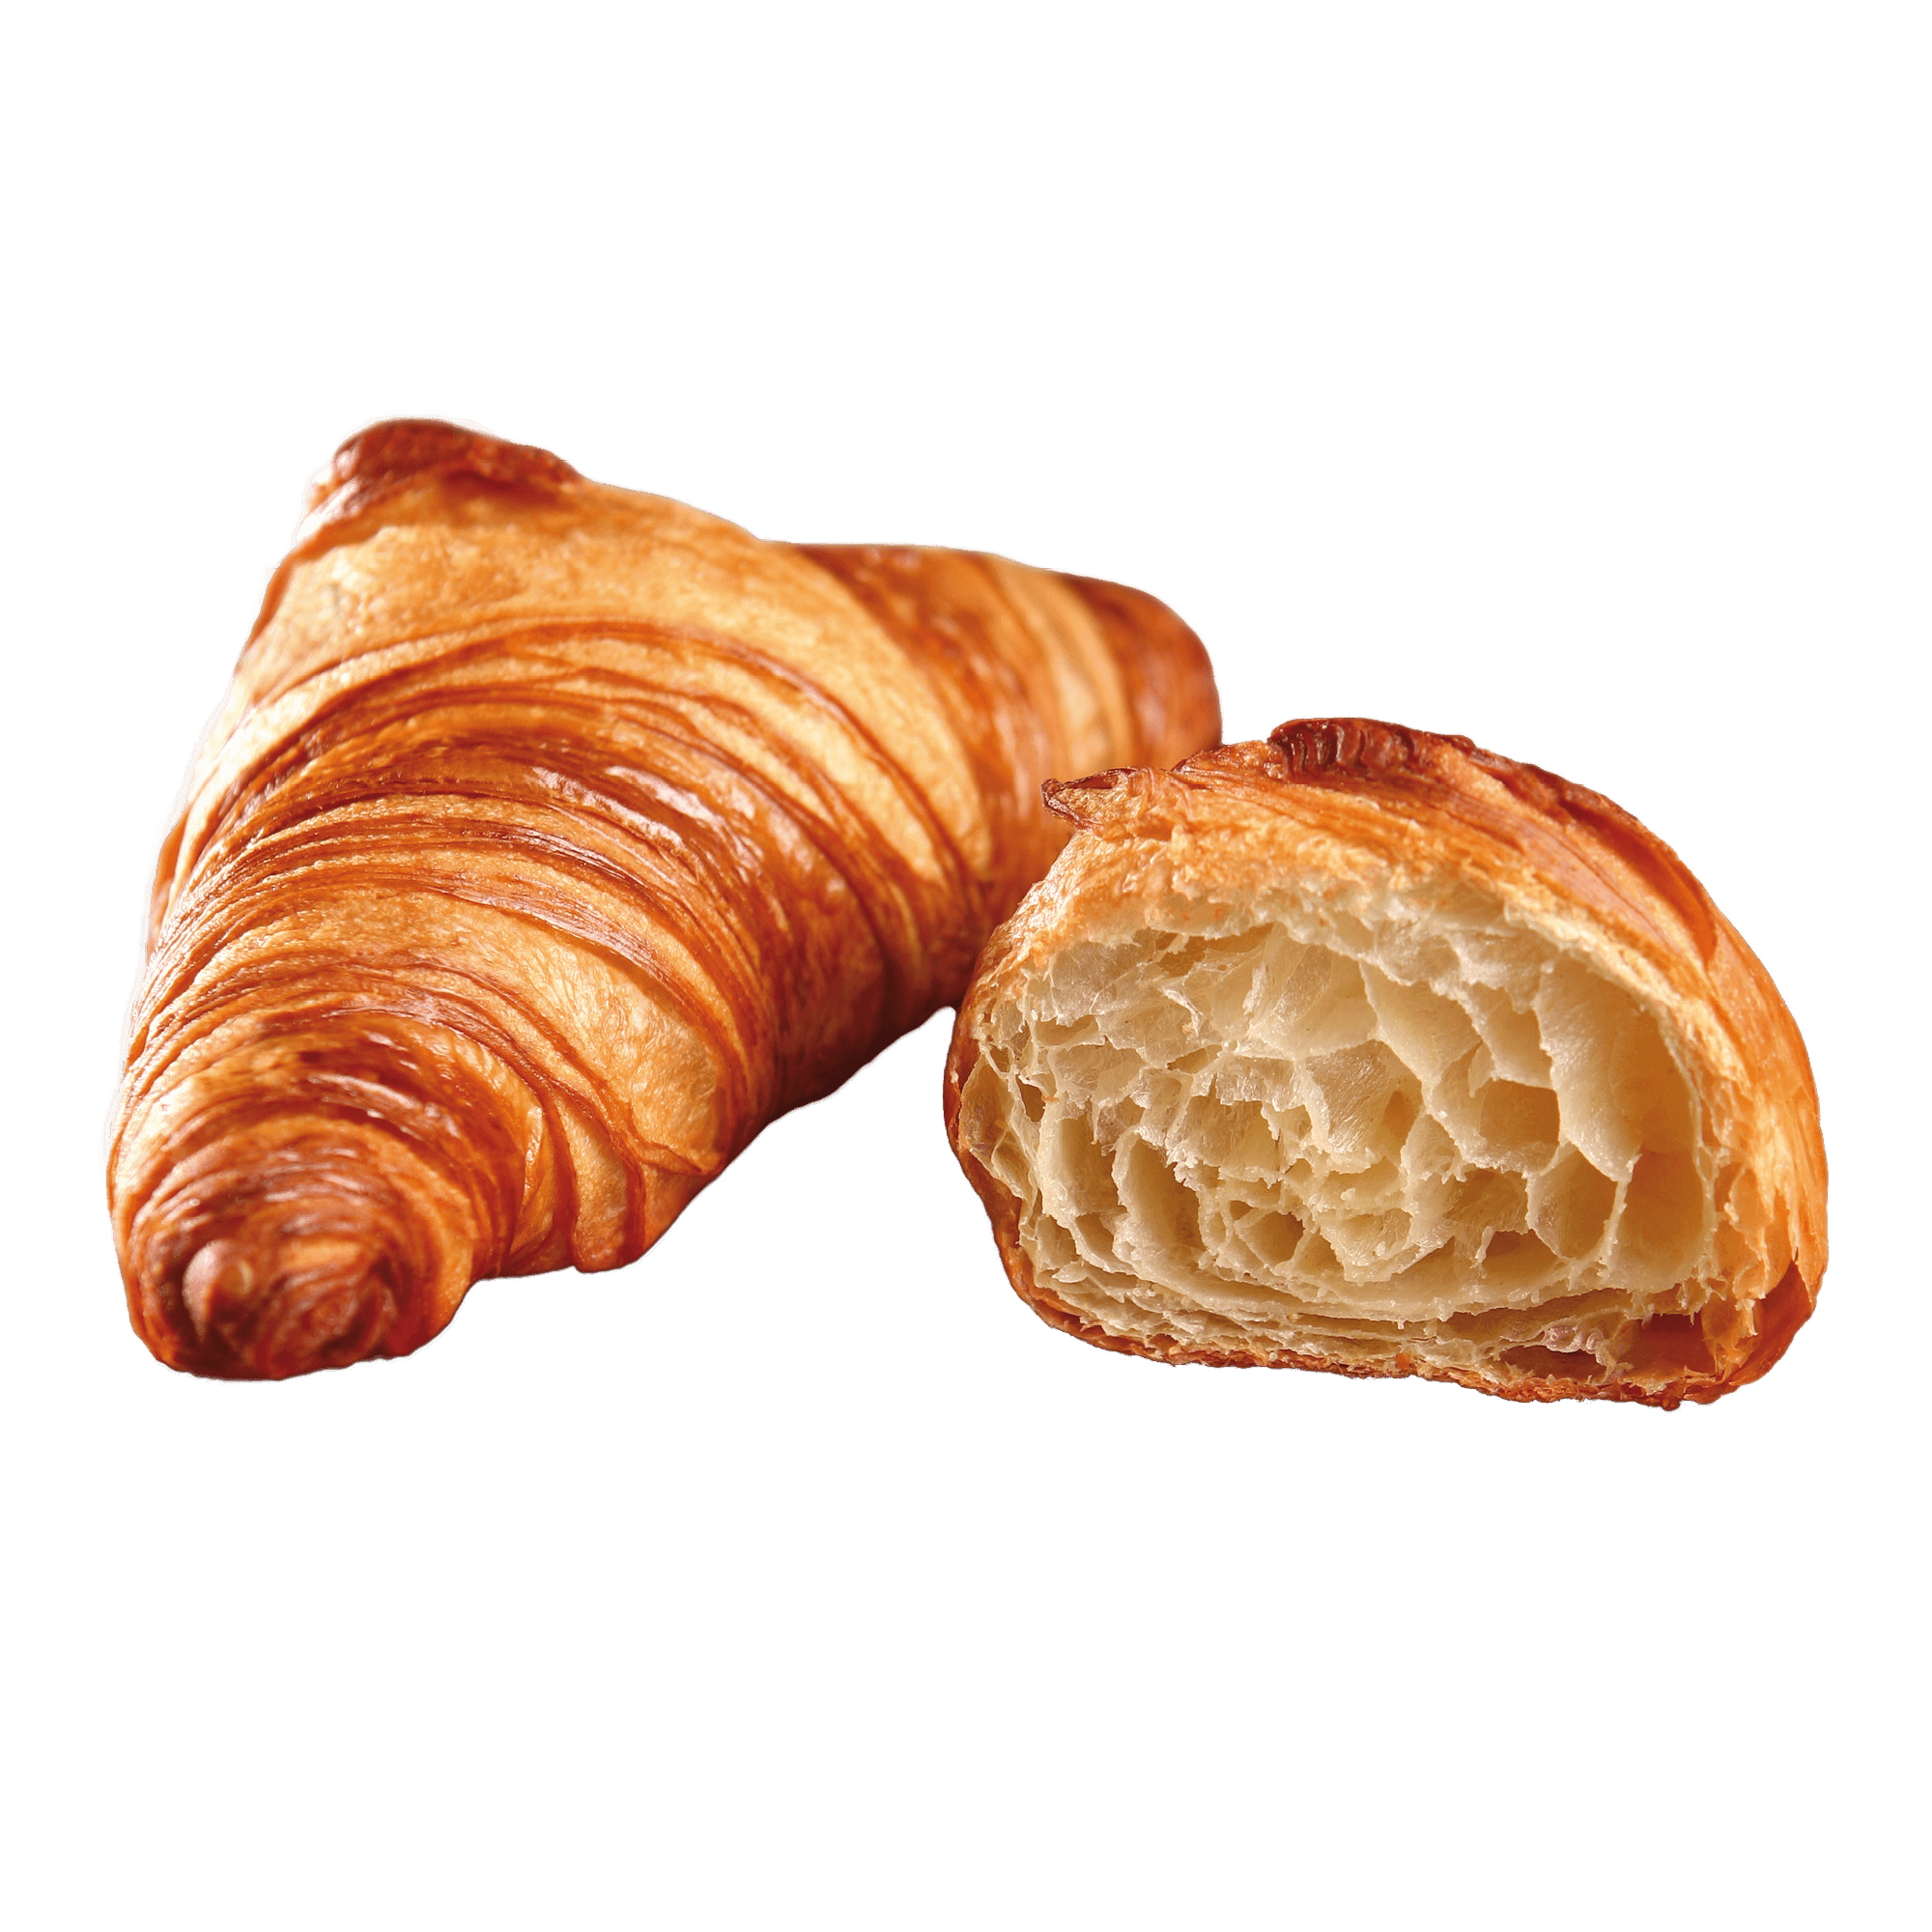 Large Butter Croissant HT - Savory Gourmet